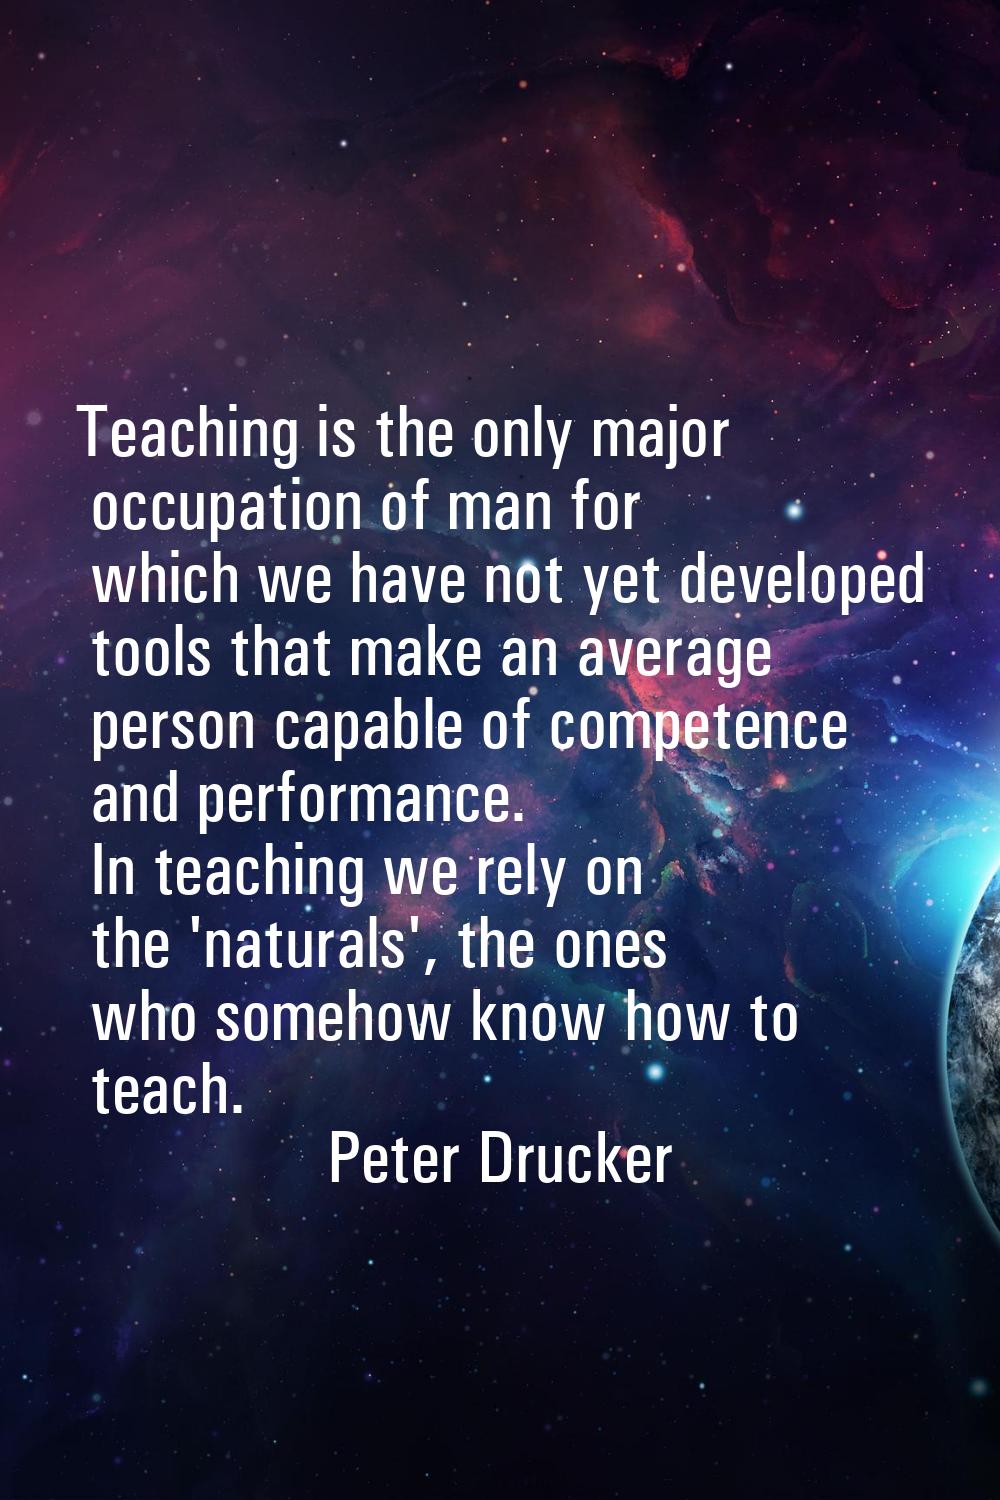 Teaching is the only major occupation of man for which we have not yet developed tools that make an